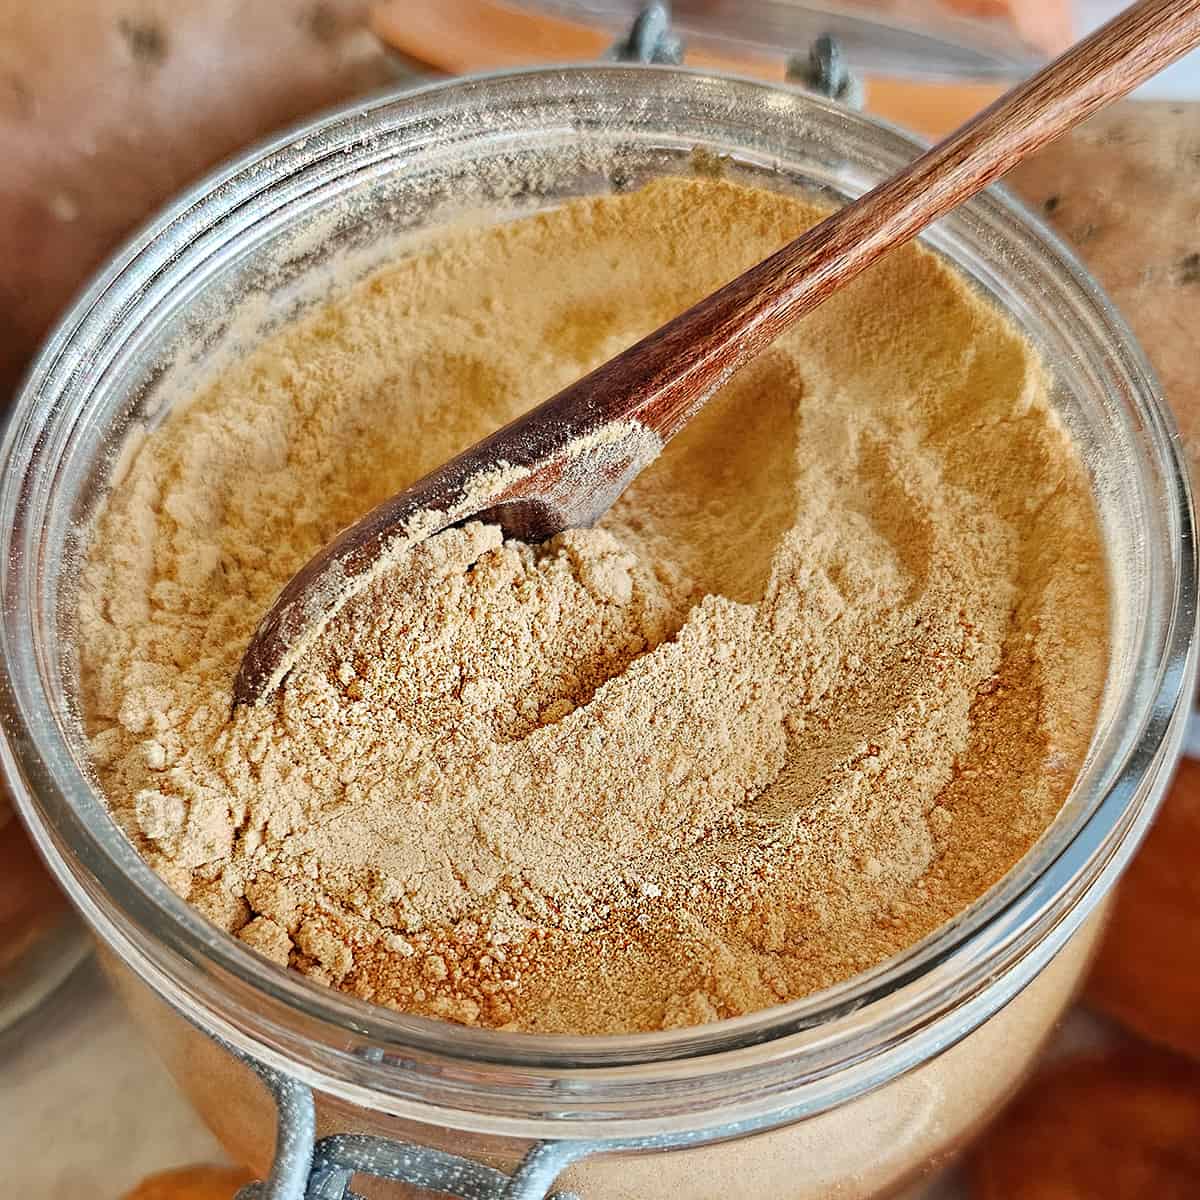 Sweet potato powder in a jar with a wooden spoon.